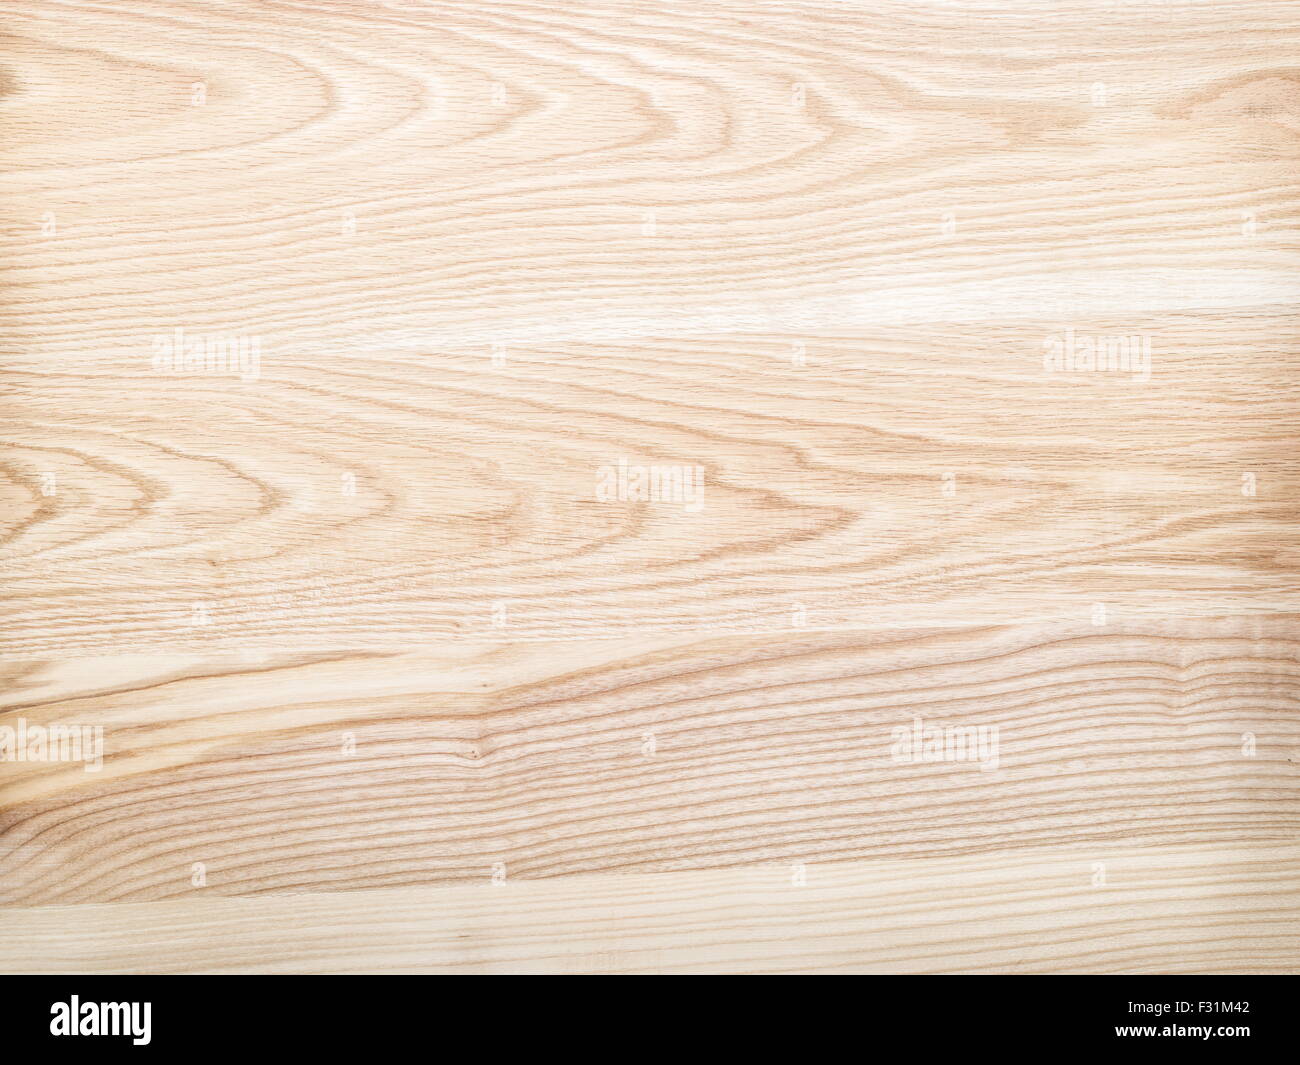 Brown wooden background. Stock Photo